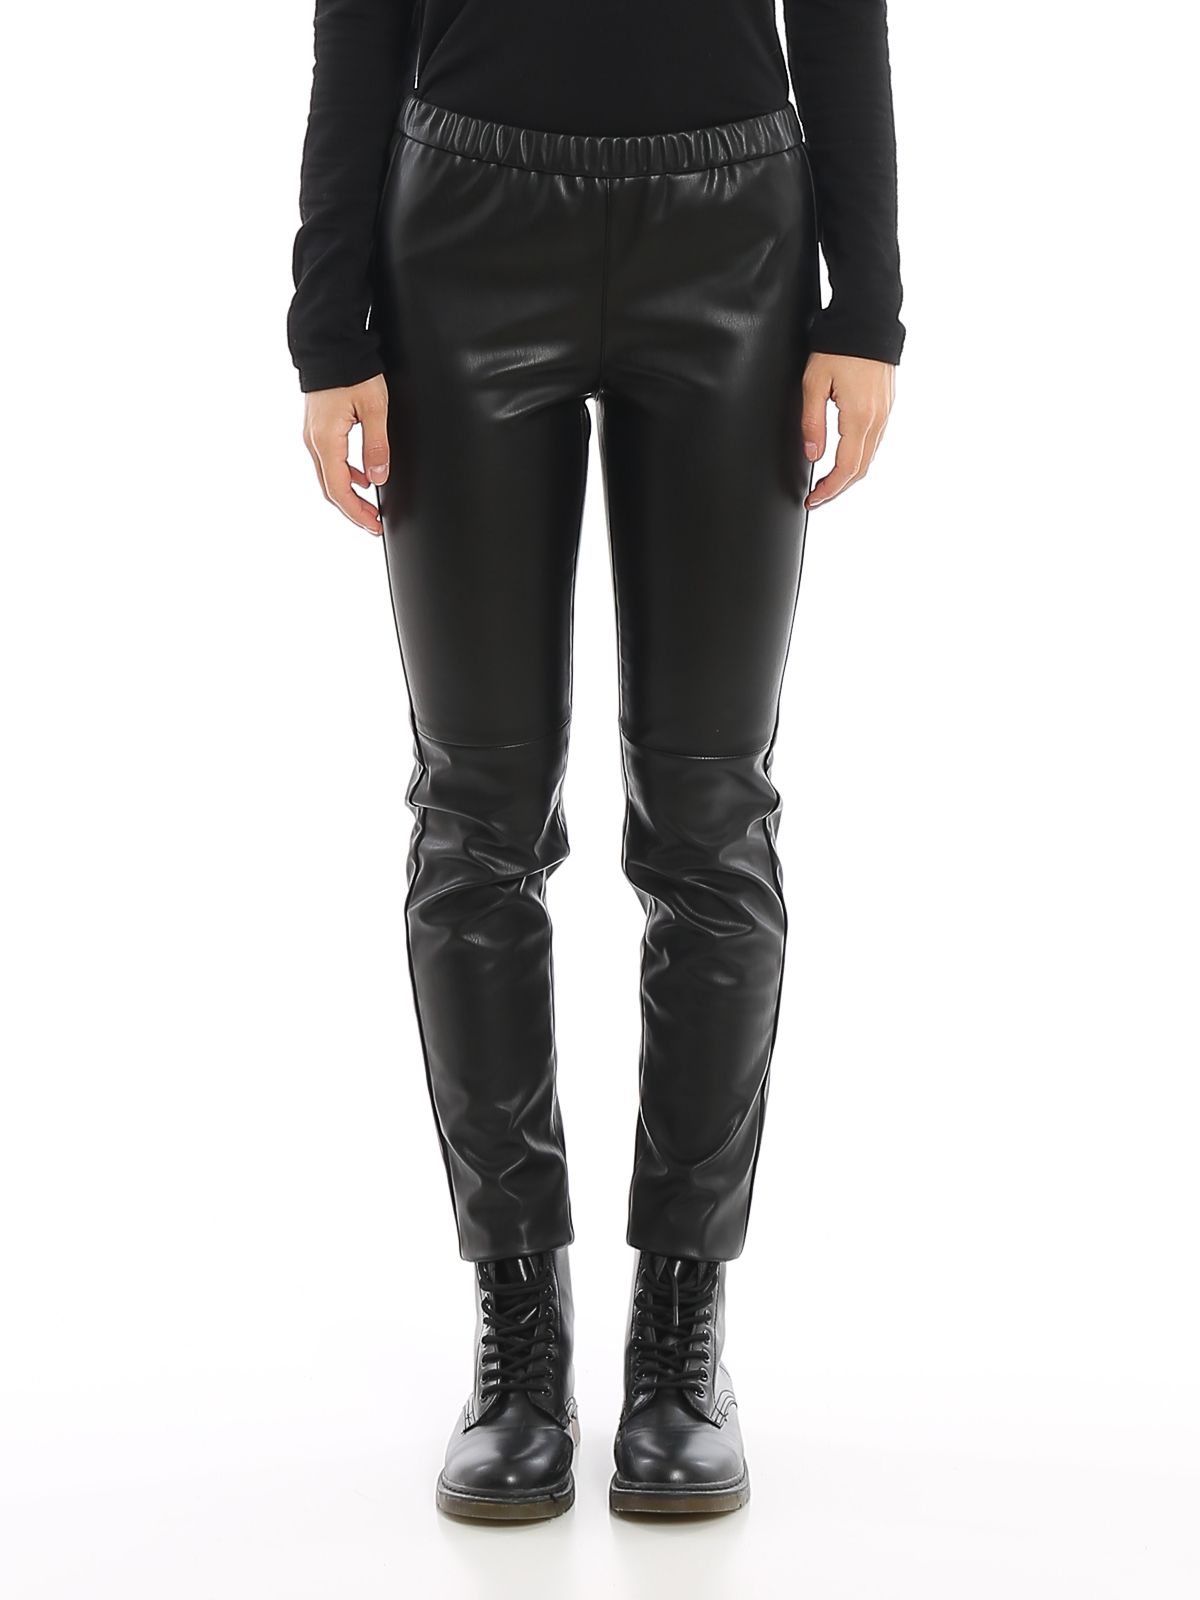 https://images.thebestshops.com/product_images/original/iKRIX-michael-kors-leather-trousers-faux-leather-leggings-00000181122f00s013.jpg